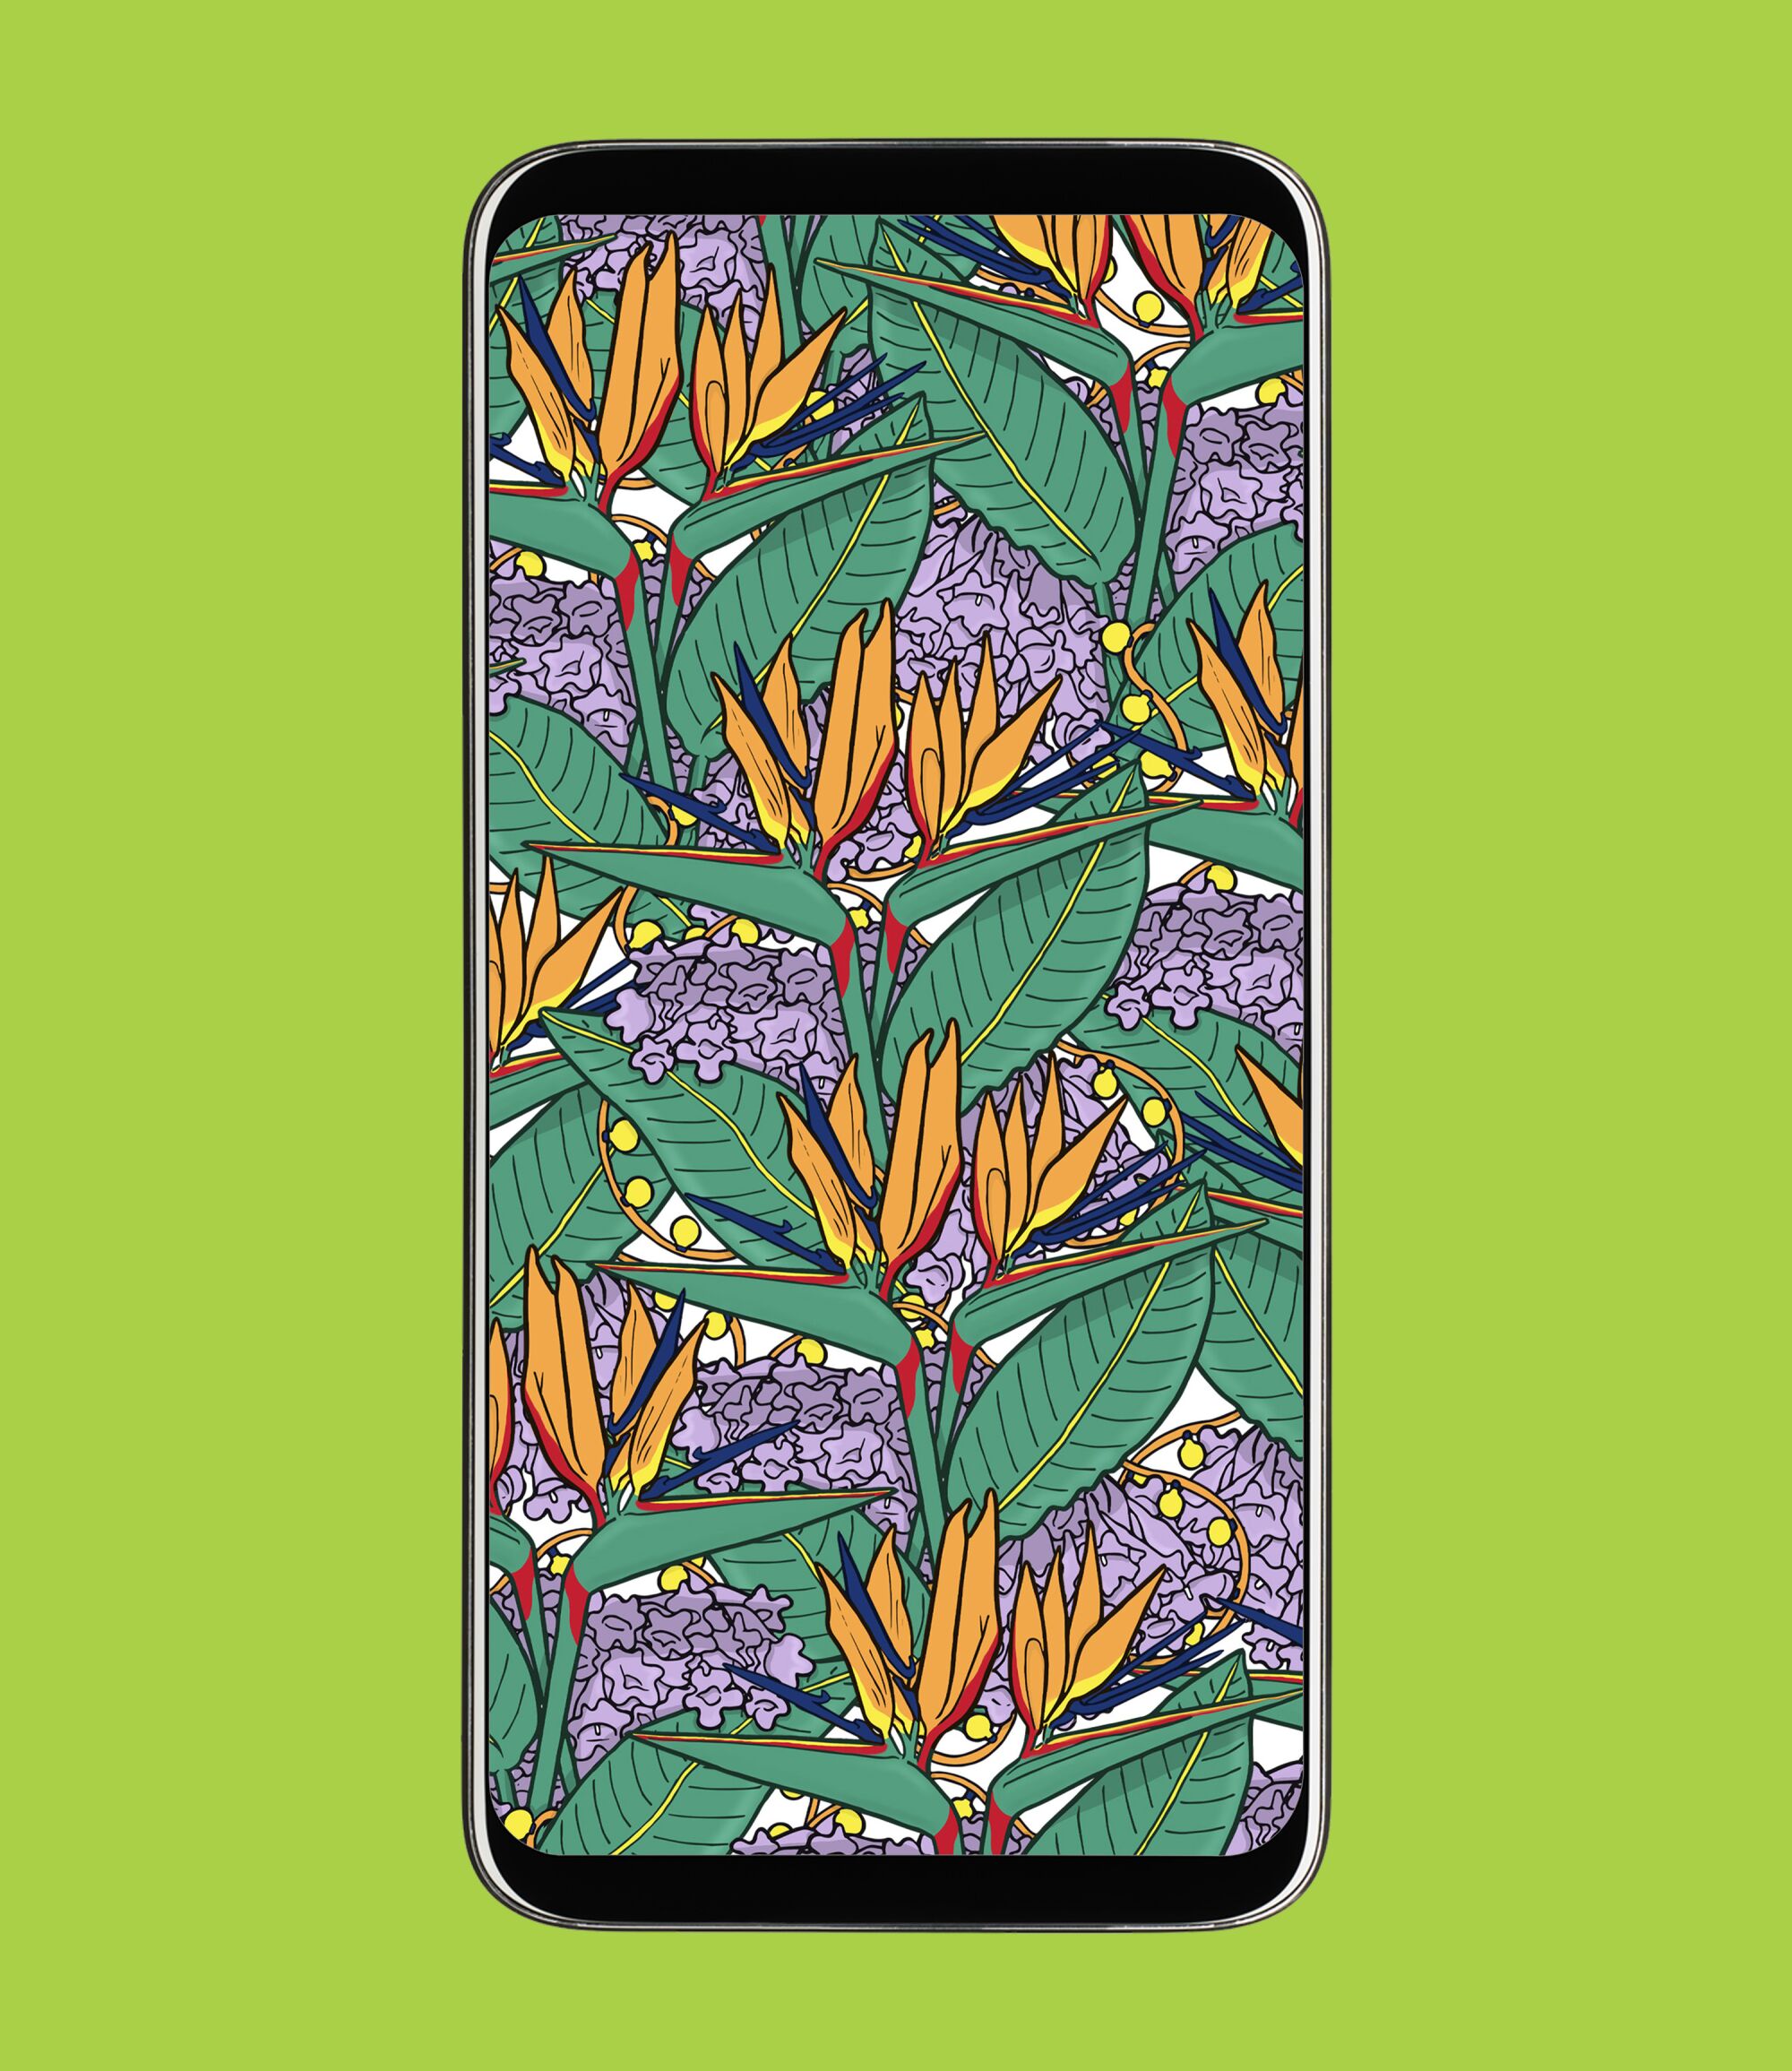 Mockup of a phone background with a birds of paradise illustration.